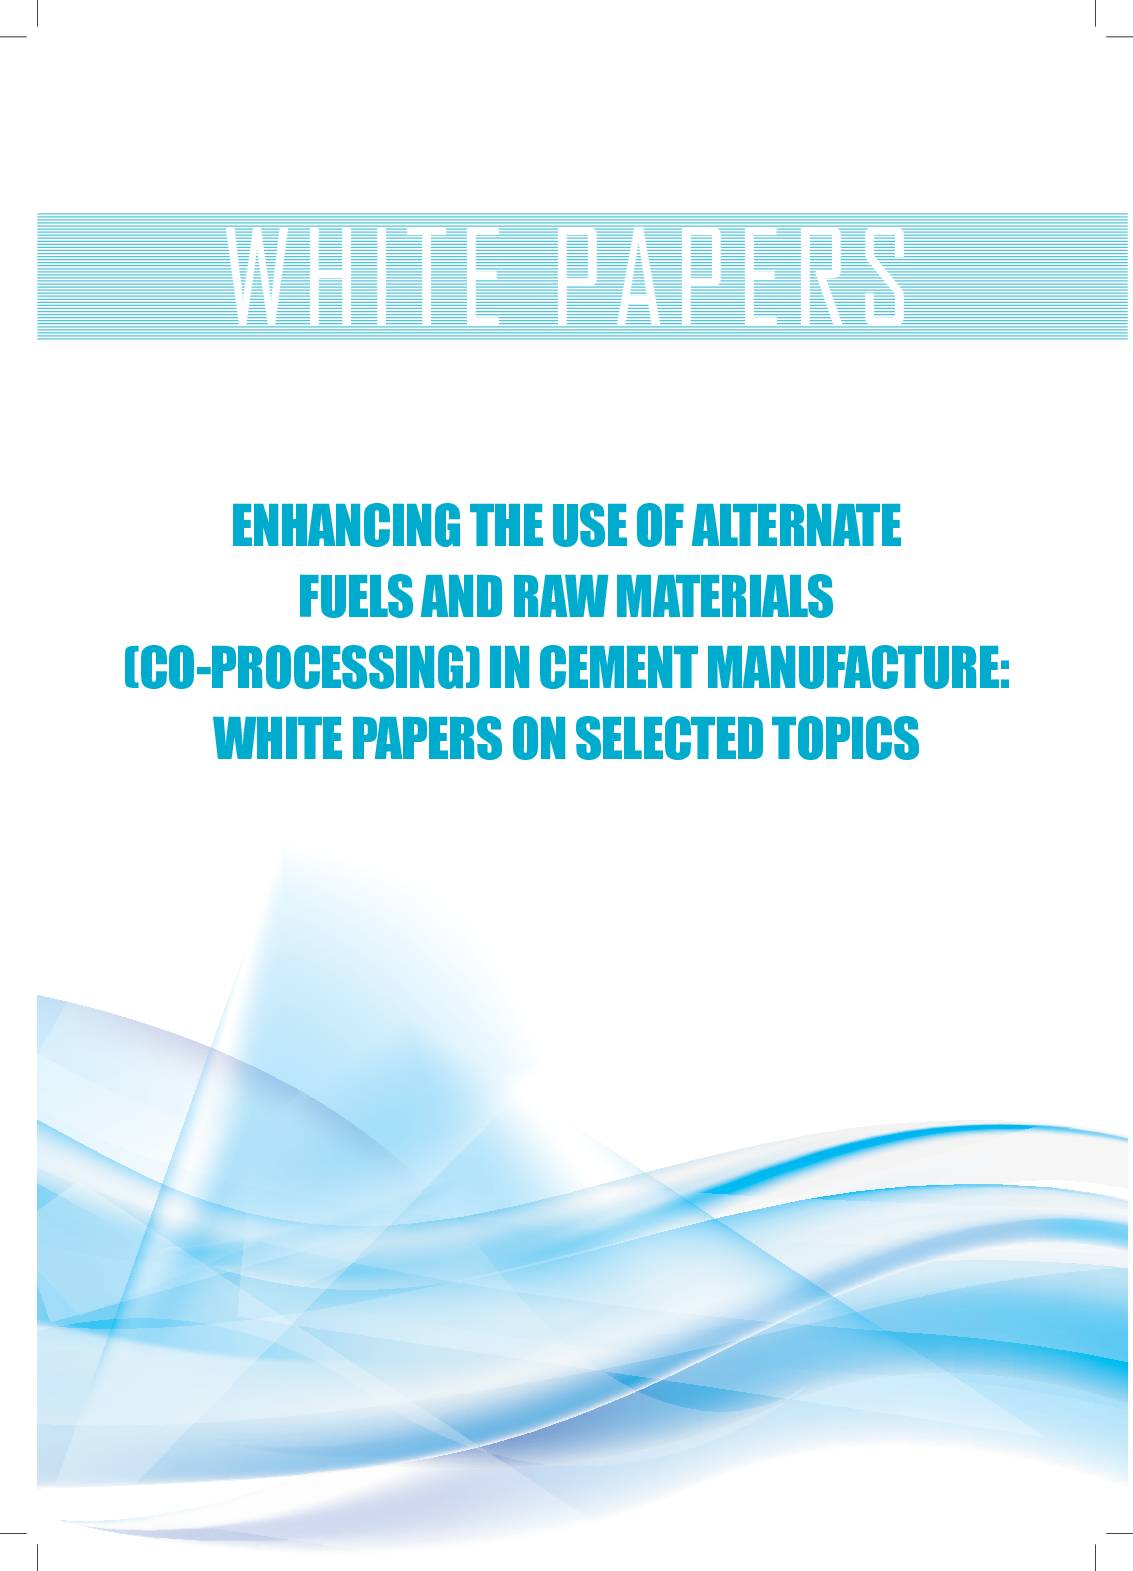 Enhancing the Use of Alternate Fuels and Raw Materials (Co-processing) in cement manufacture: White Papers on Selected Topics